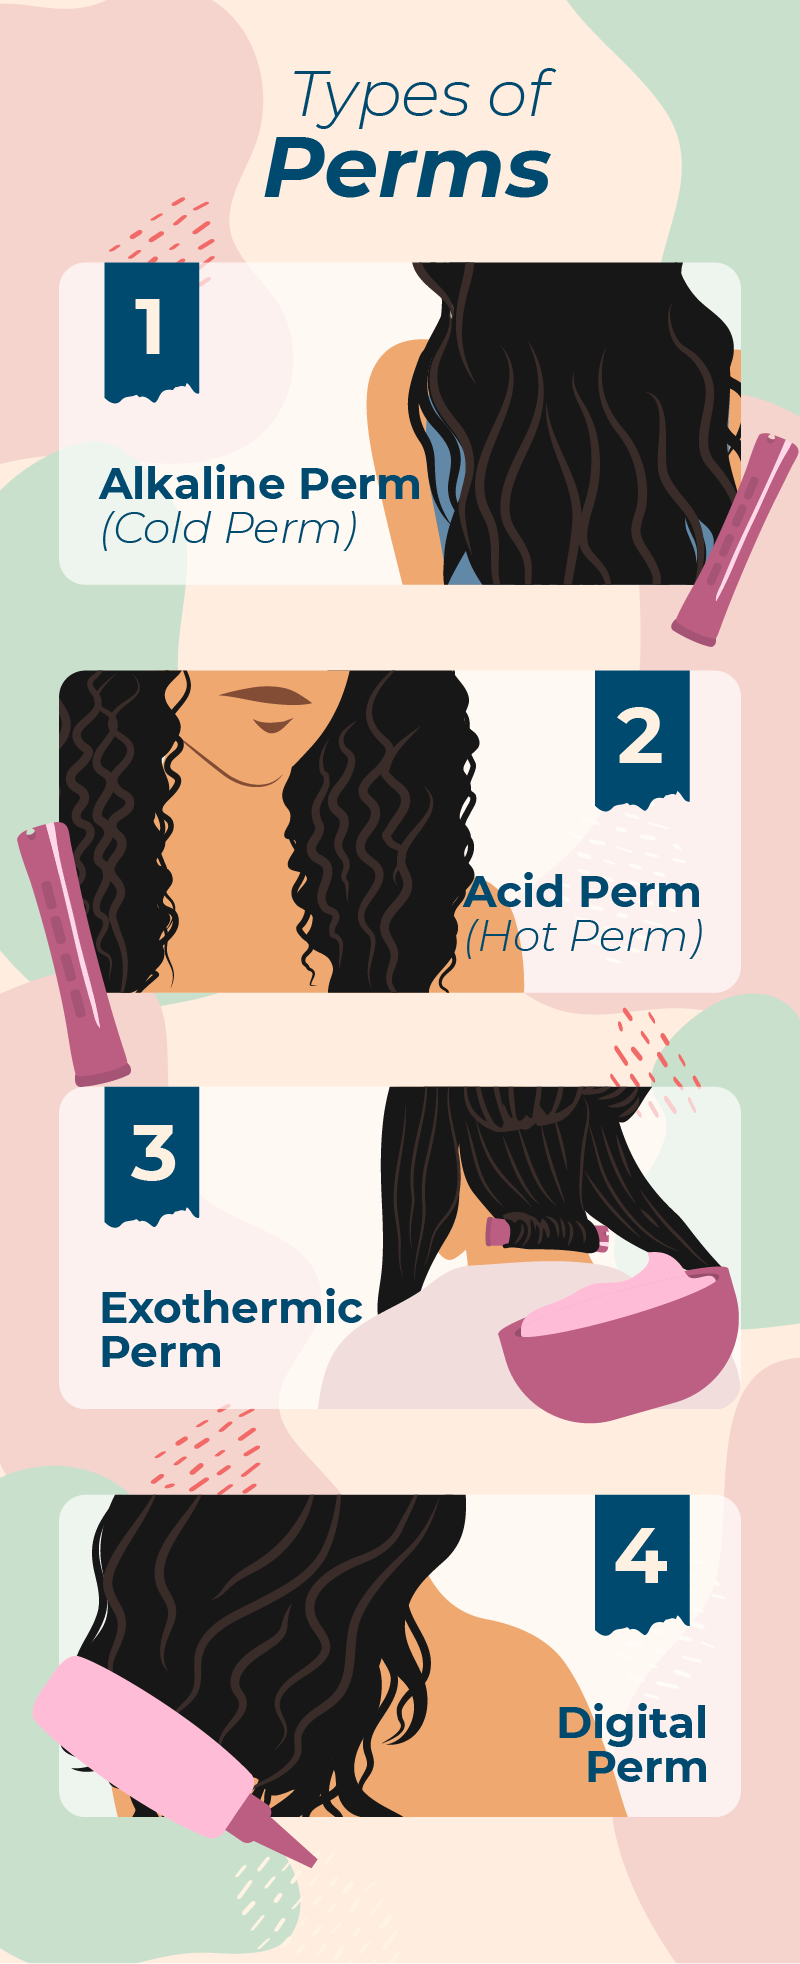 Image showing how much the various types of perms cost